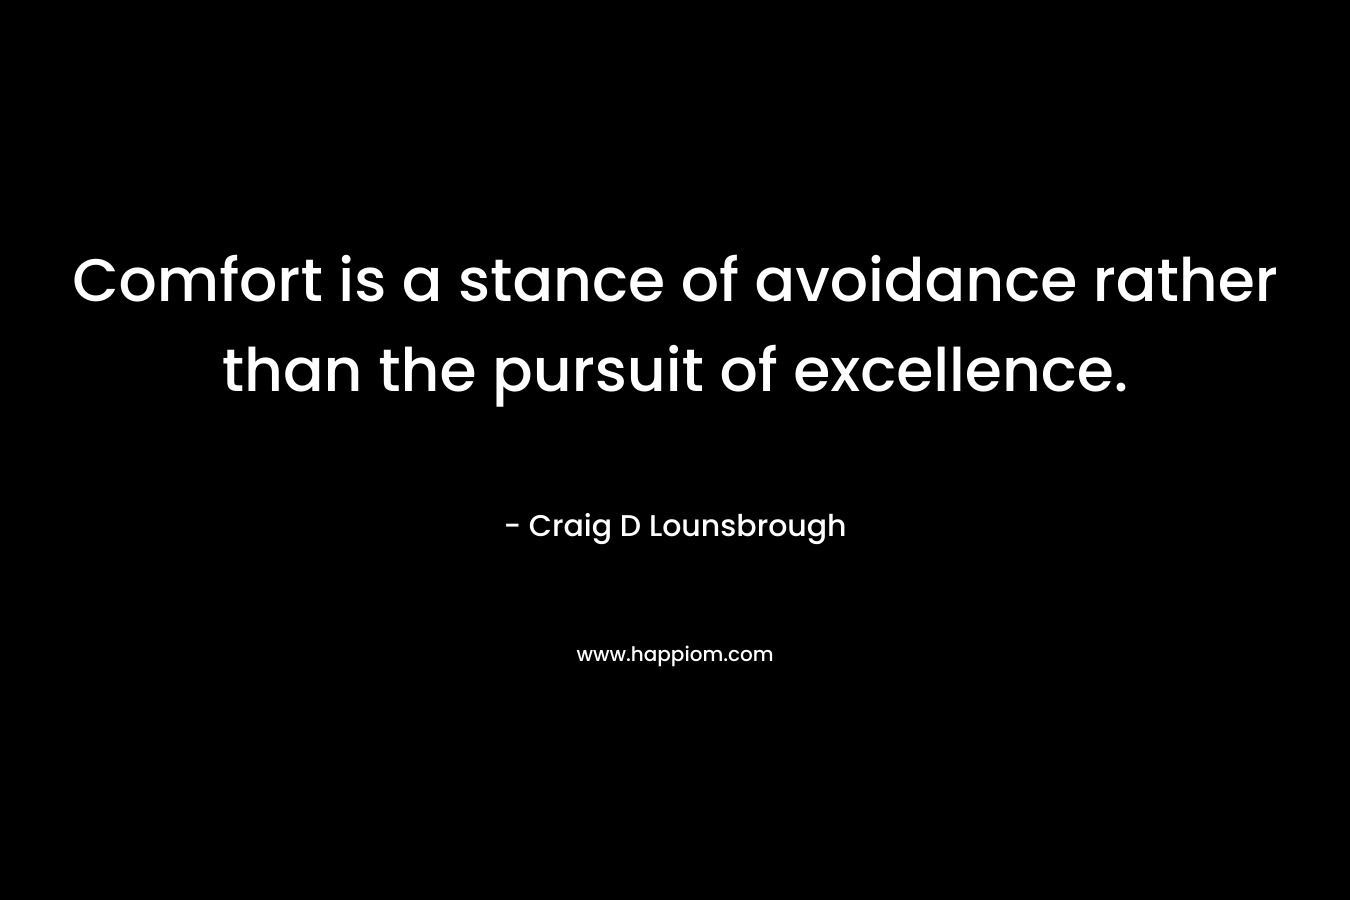 Comfort is a stance of avoidance rather than the pursuit of excellence. – Craig D Lounsbrough